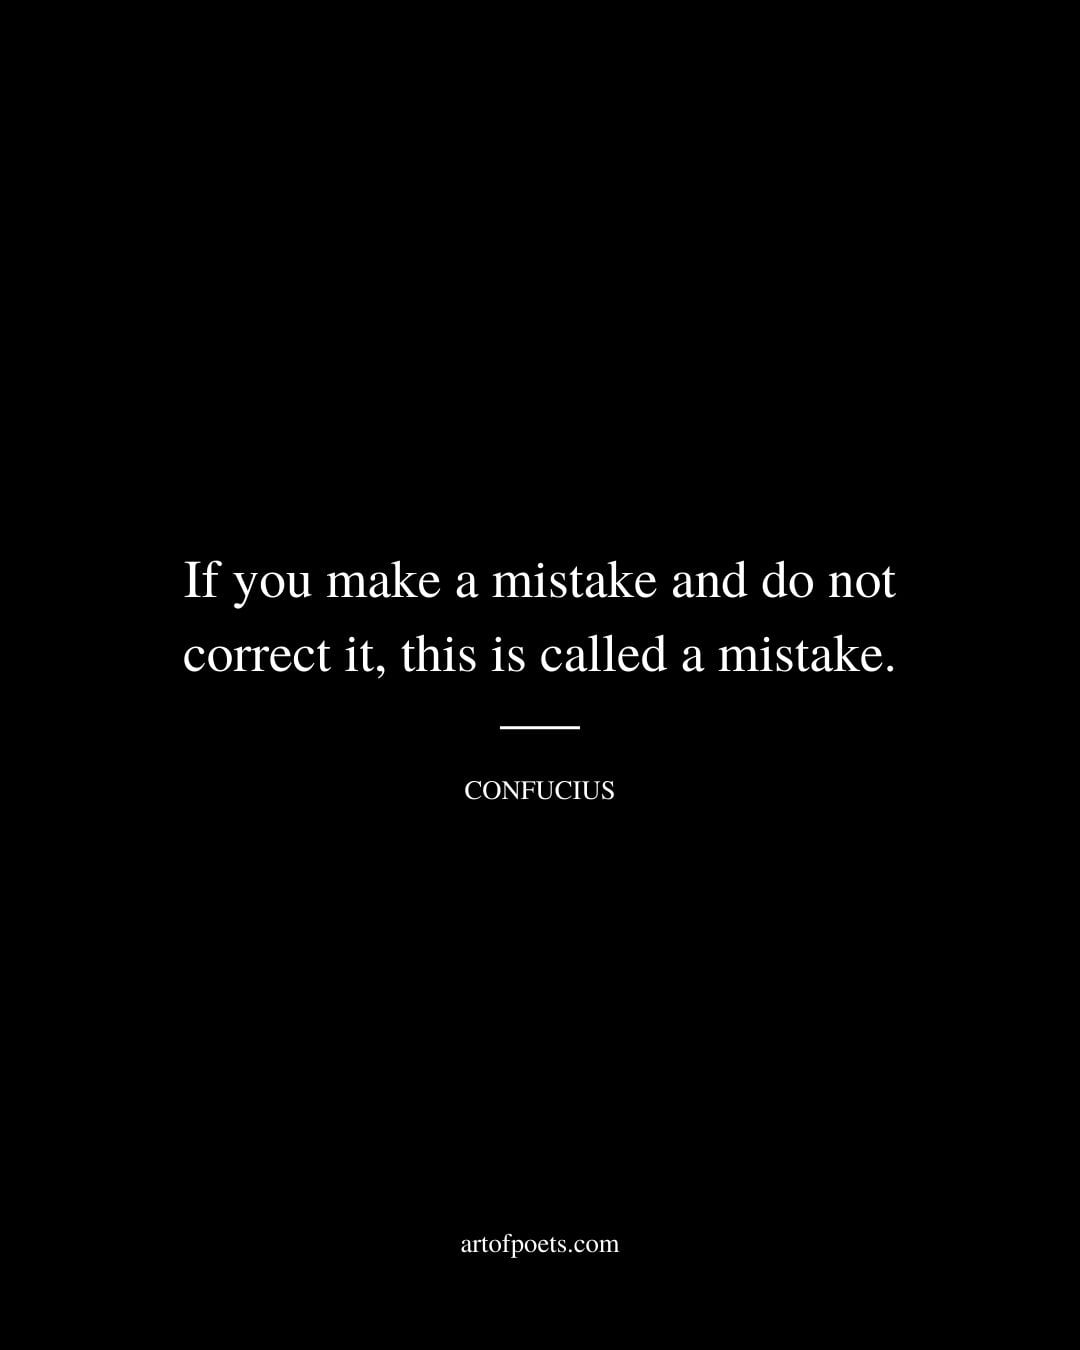 If you make a mistake and do not correct it this is called a mistake